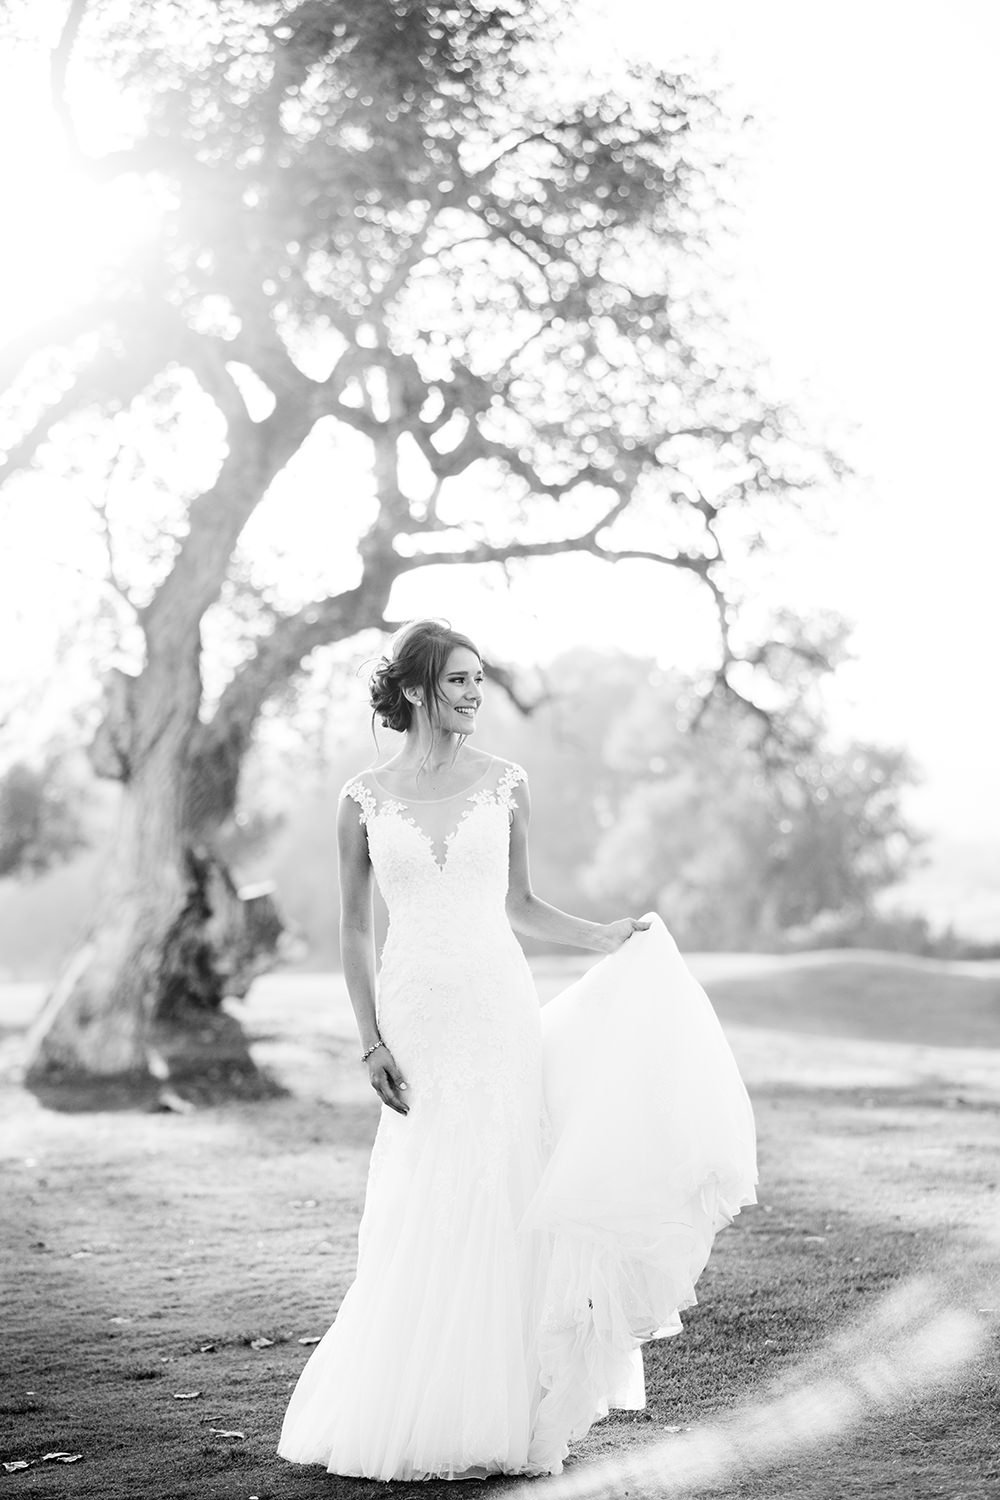 stunning bride image at carlton oaks country club black and white